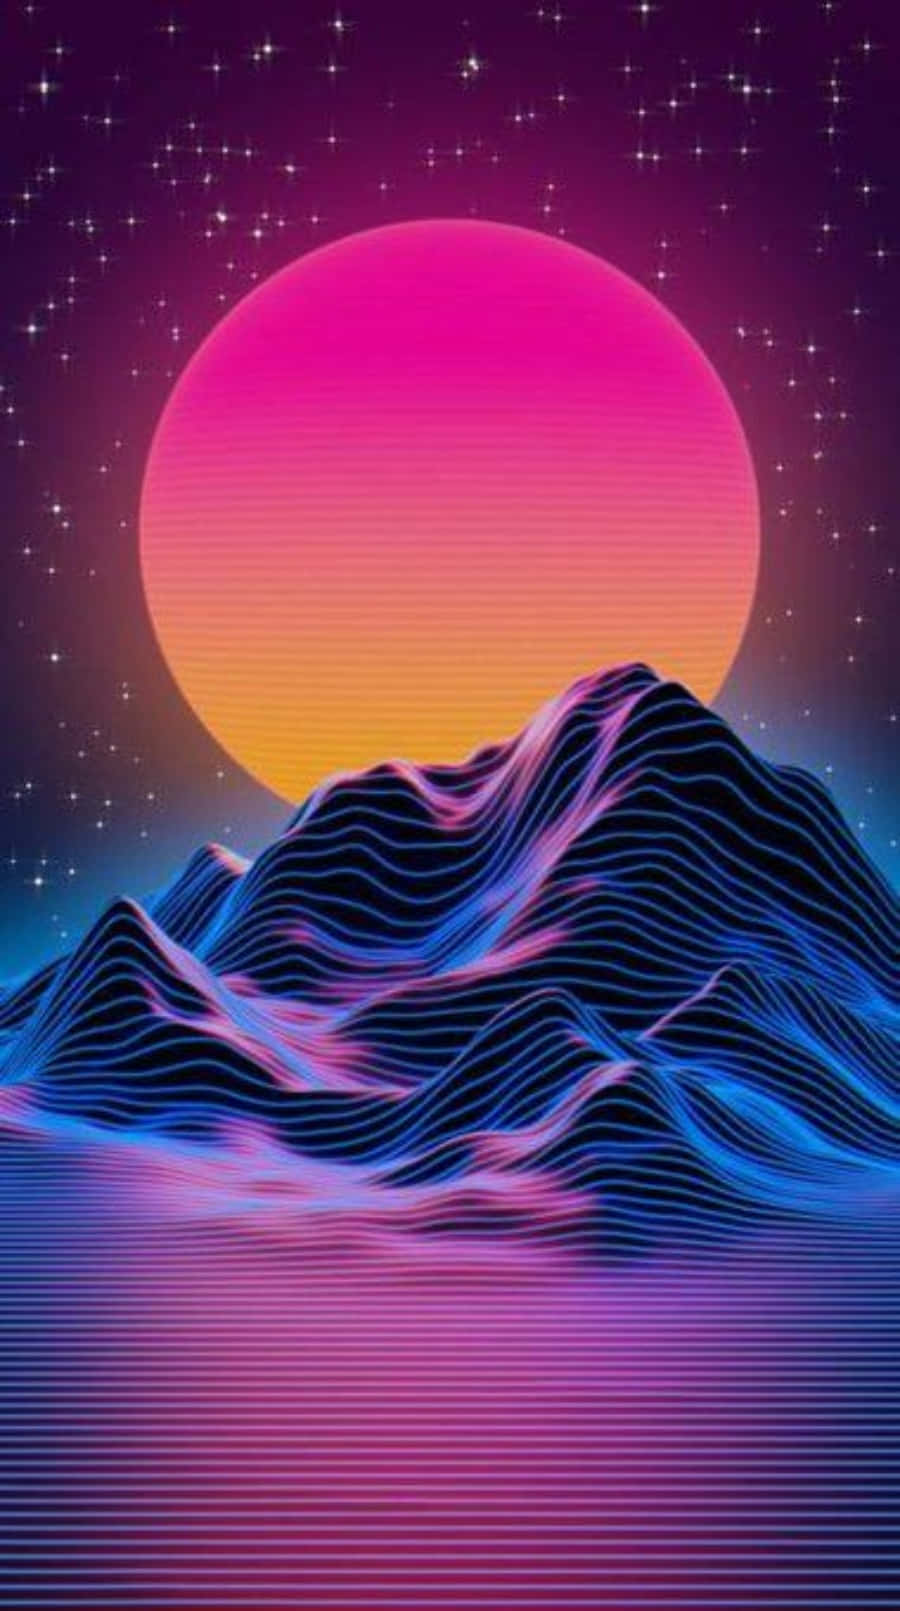 Download 80s Vaporwave Mountain And Sun Wallpaper | Wallpapers.com